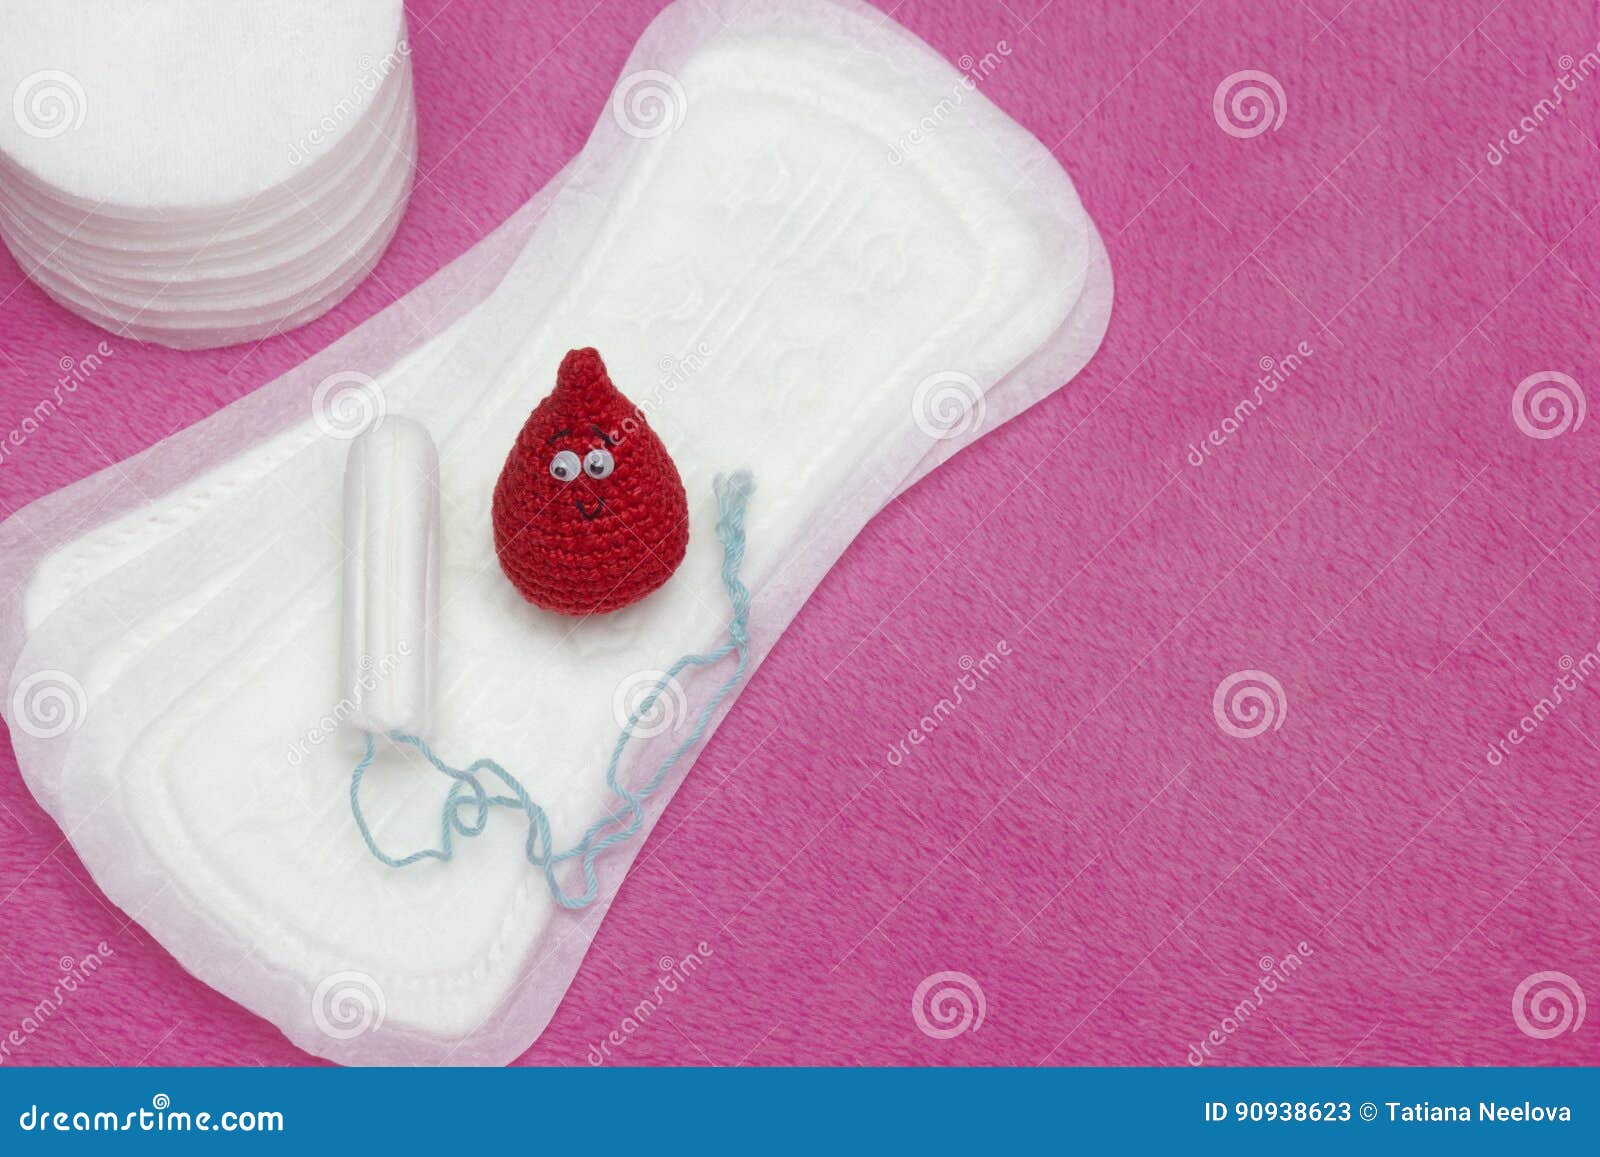 Menstruation Tampons and Sanitary Soft Pads. Woman Hygiene Protection and  Crochet Funny Blood Drop. Woman Critical Days, Gynecolog Stock Image -  Image of girl, fertility: 90938623